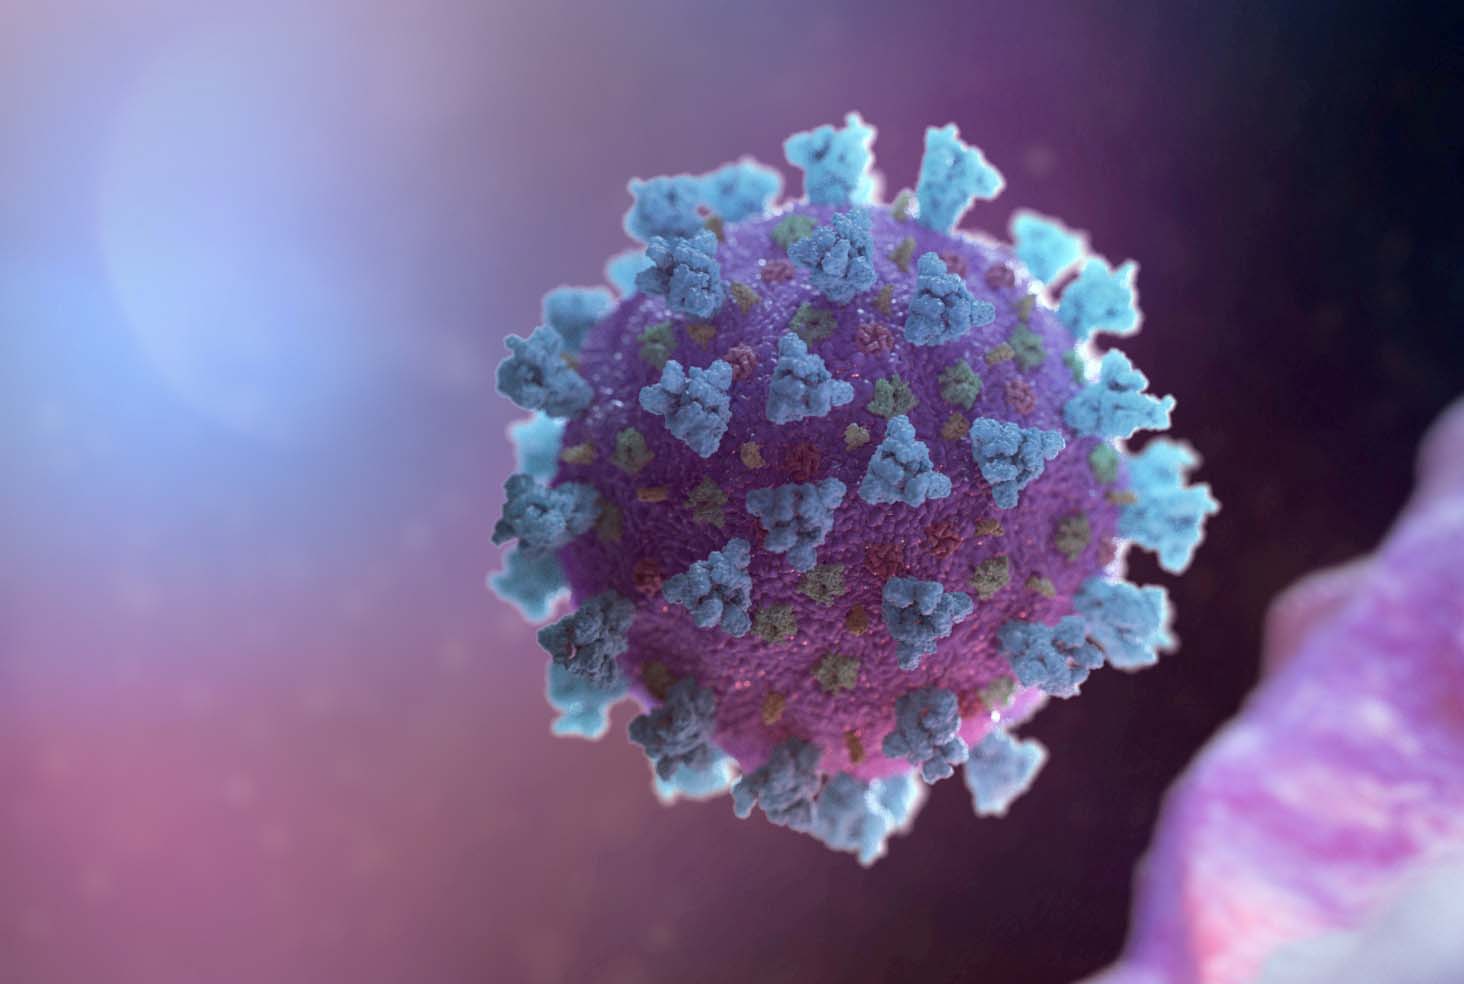 image Coronavirus: 1 death and over a 1,000 new cases in past week